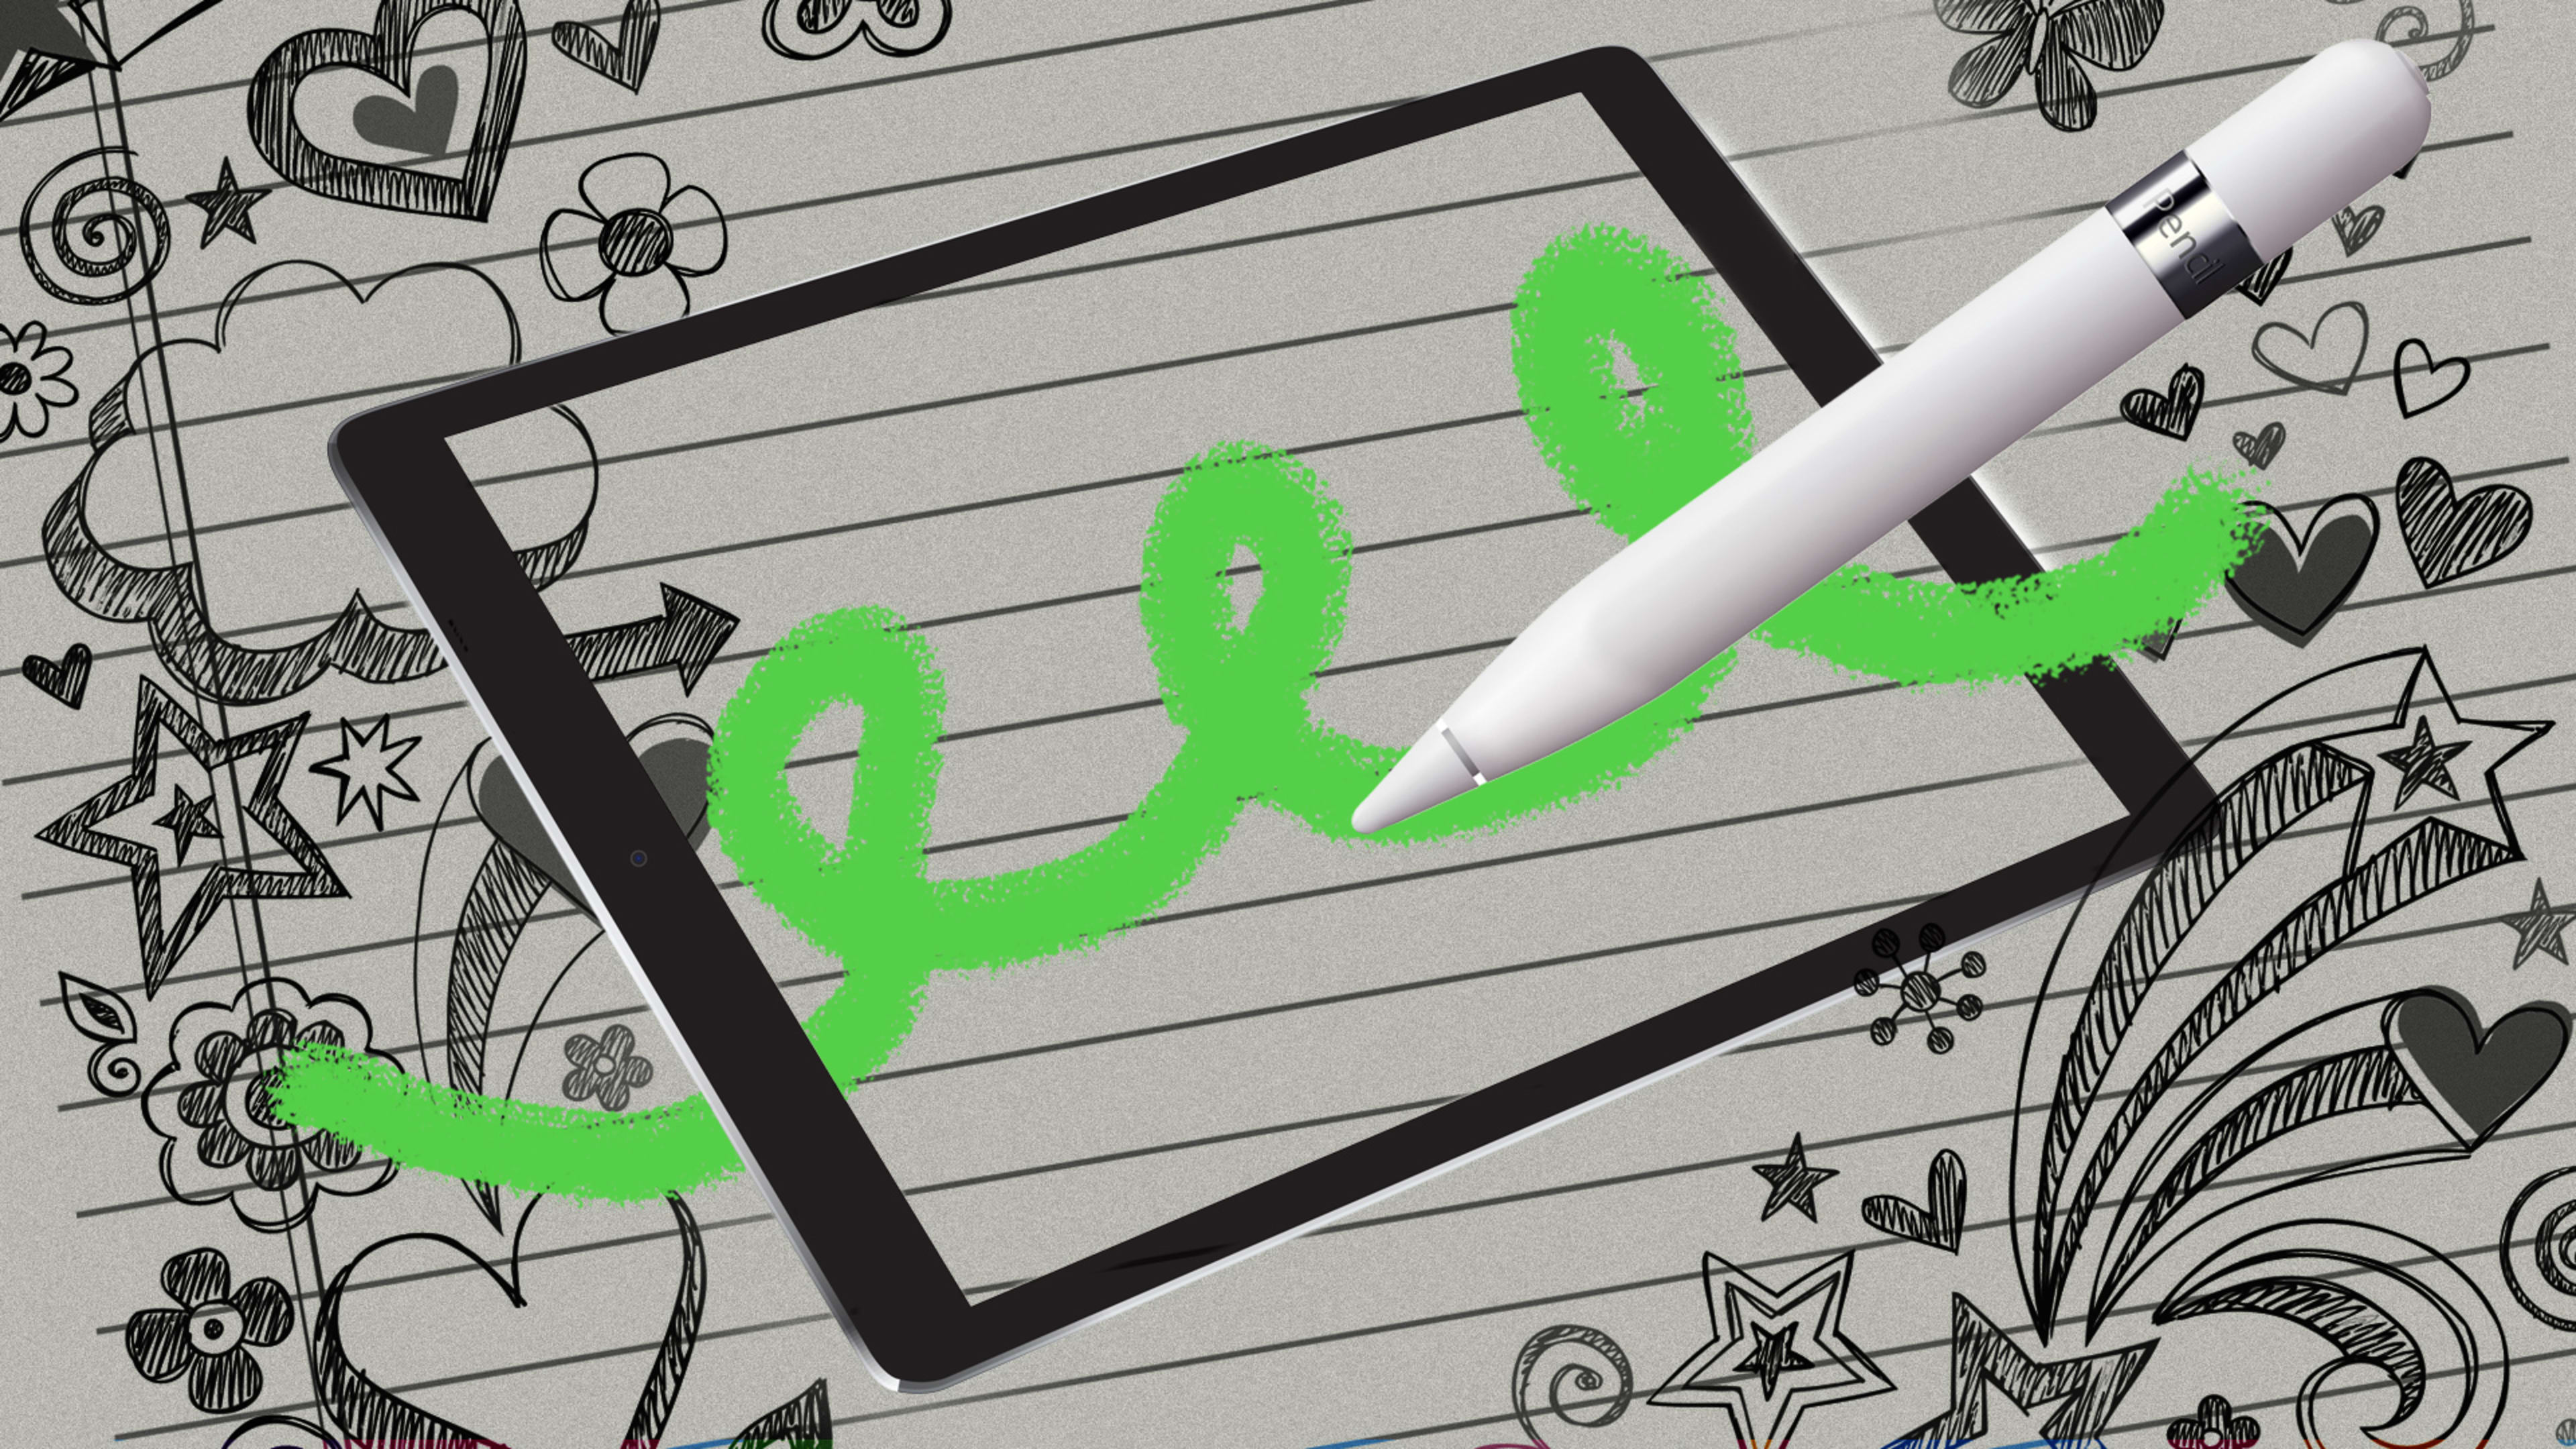 Tired of typing? These 15 products let you quickly digitize your scribbles